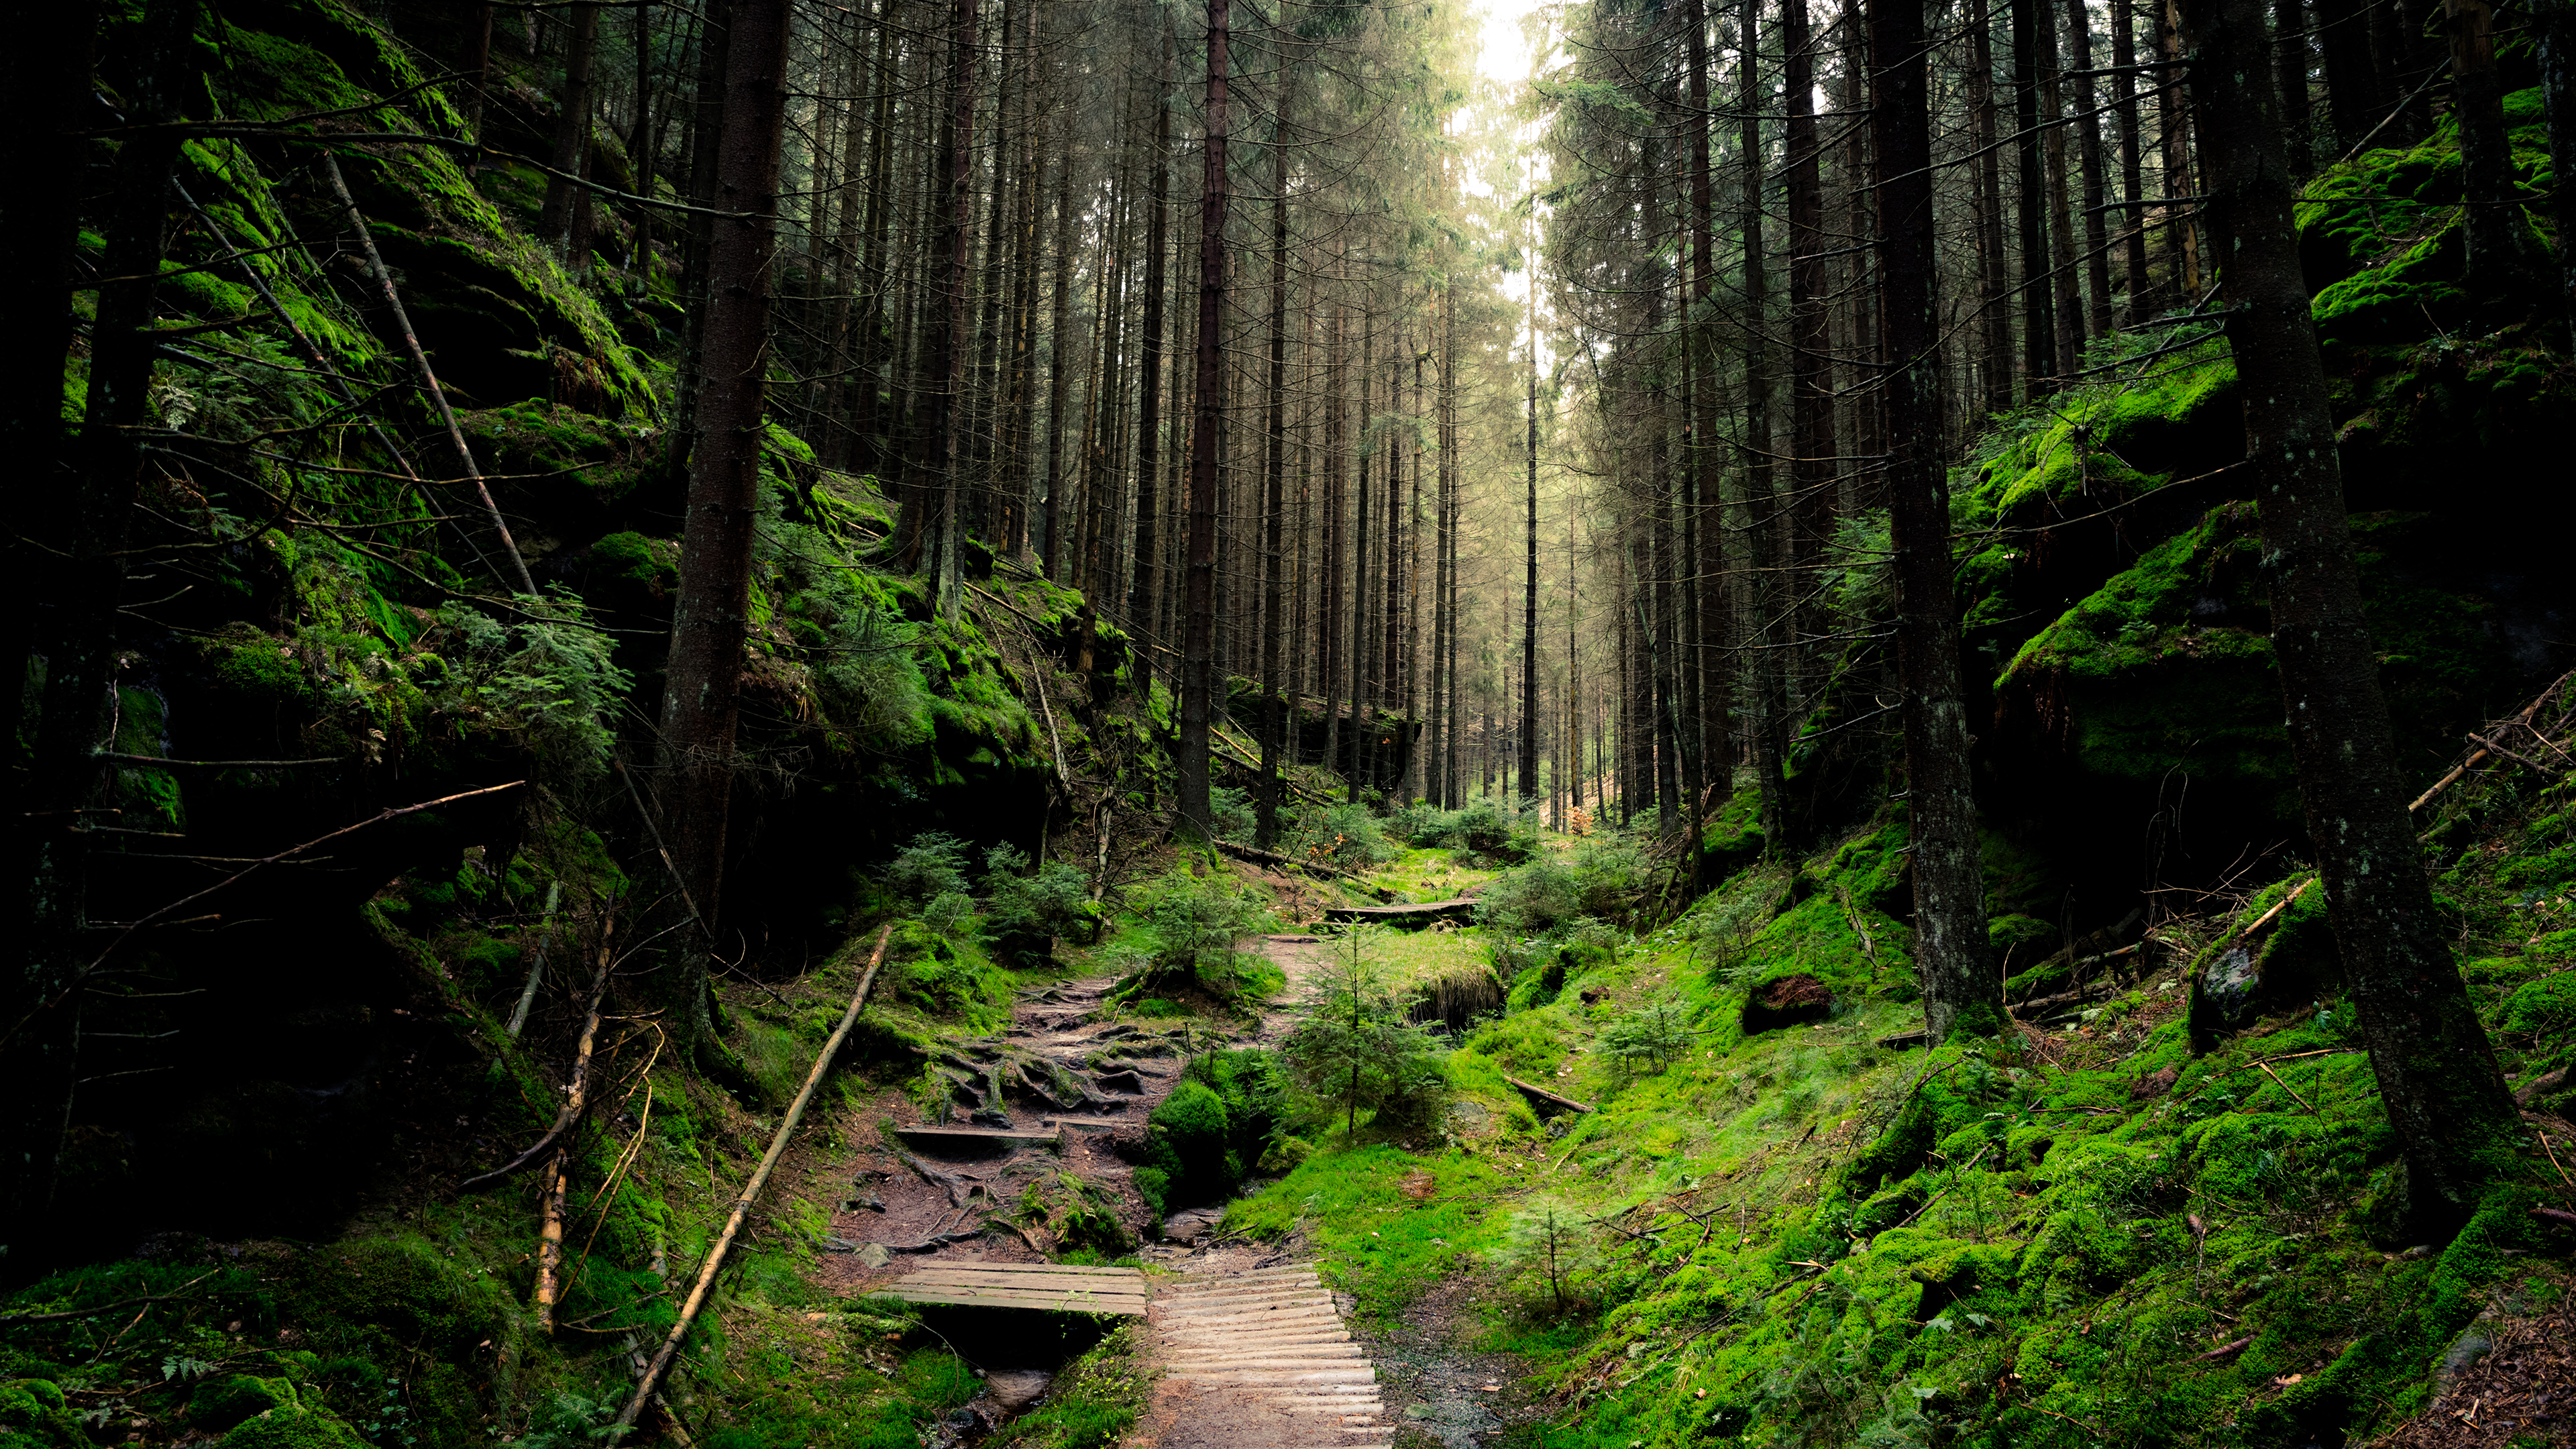 4k forest wallpaper,forest,nature,natural landscape,natural environment,old growth forest